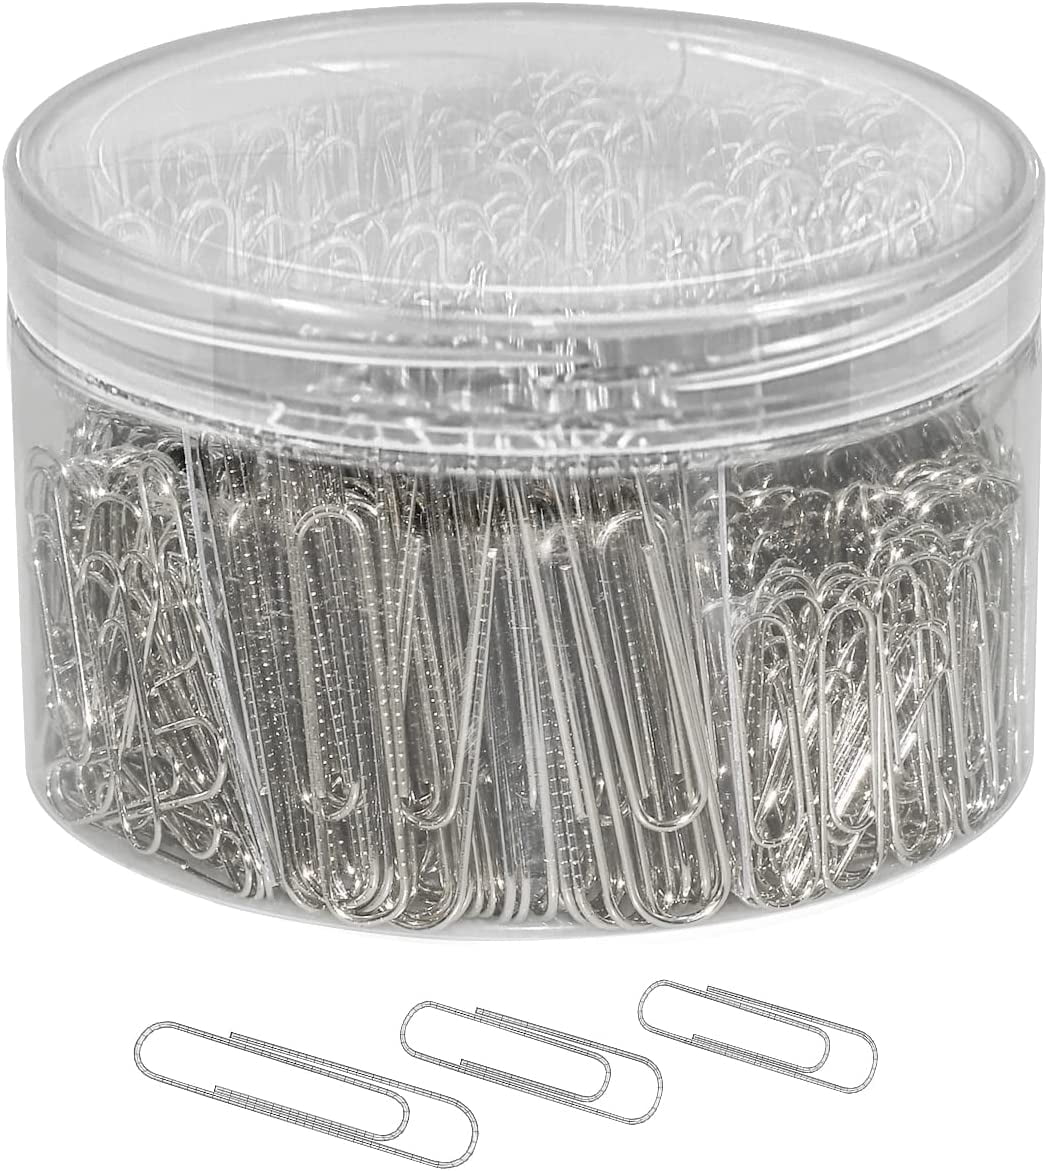 50% off on KESETKO® Large Paper Clips 50 MM, Big Gem Clip, Stainless Steel  U Clips, for Holding Loose Papers